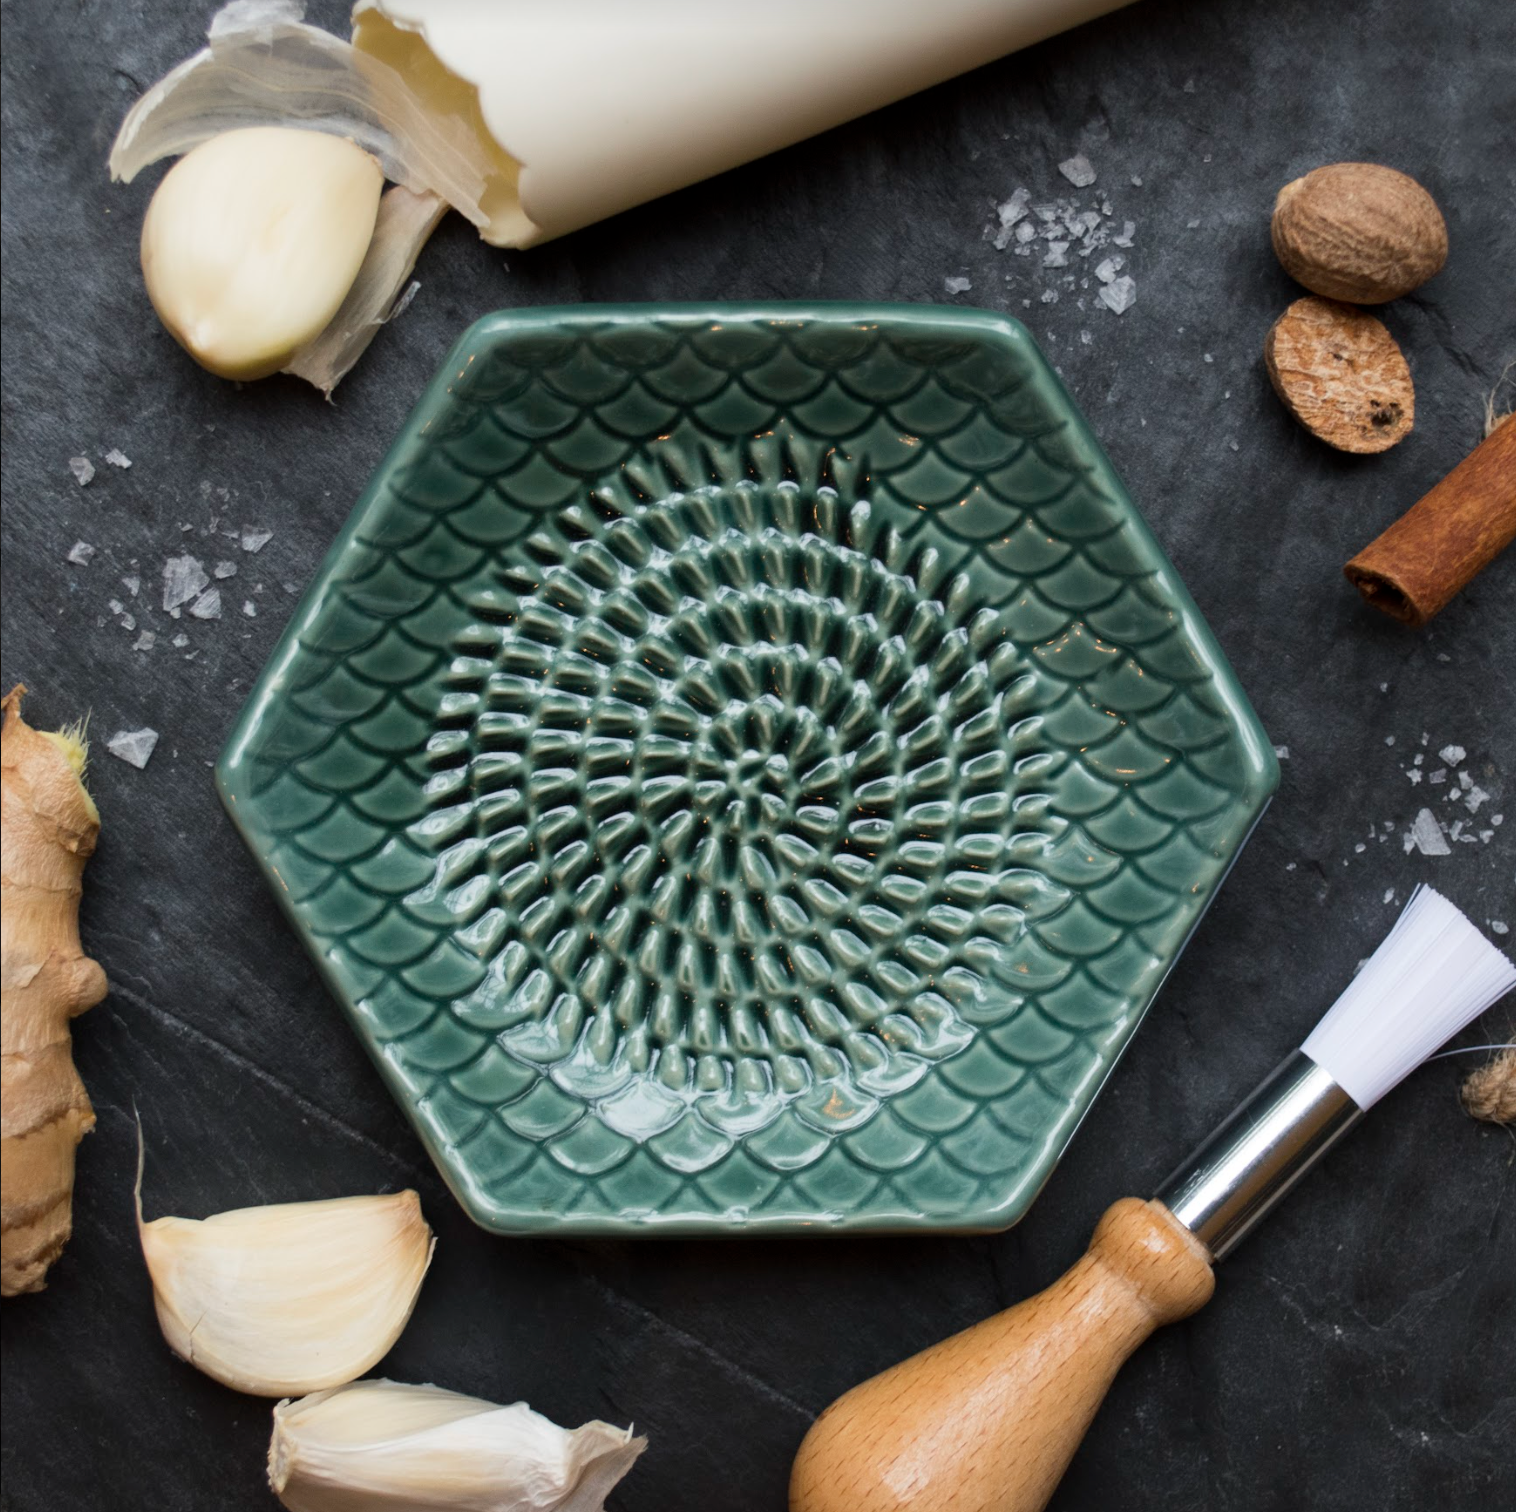 The Grate Plate Ceramic Grater: Sage Green